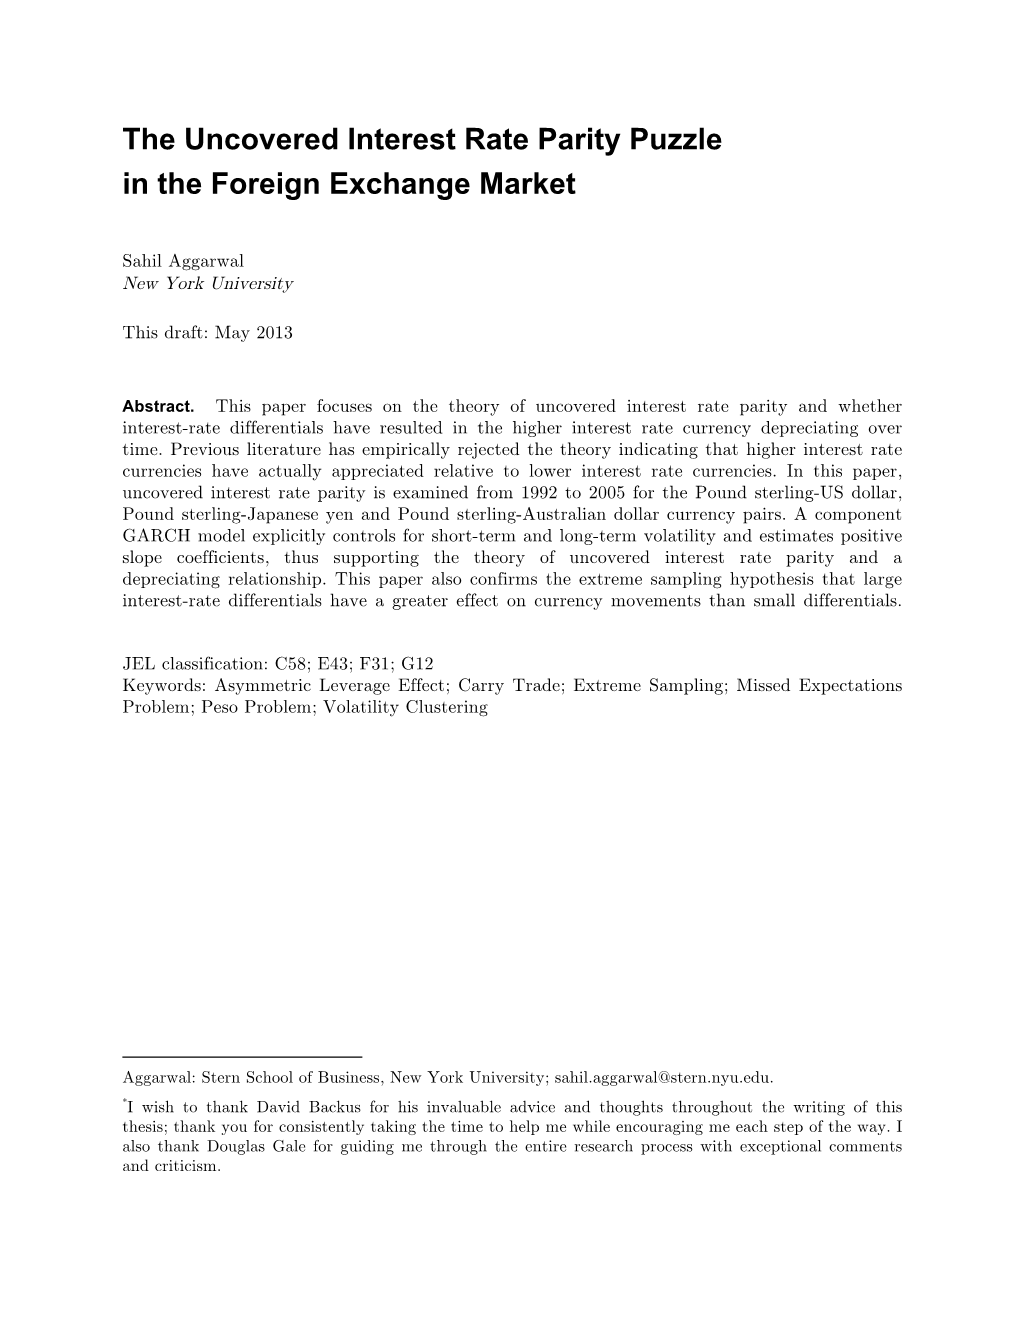 The Uncovered Interest Rate Parity Puzzle in the Foreign Exchange Market